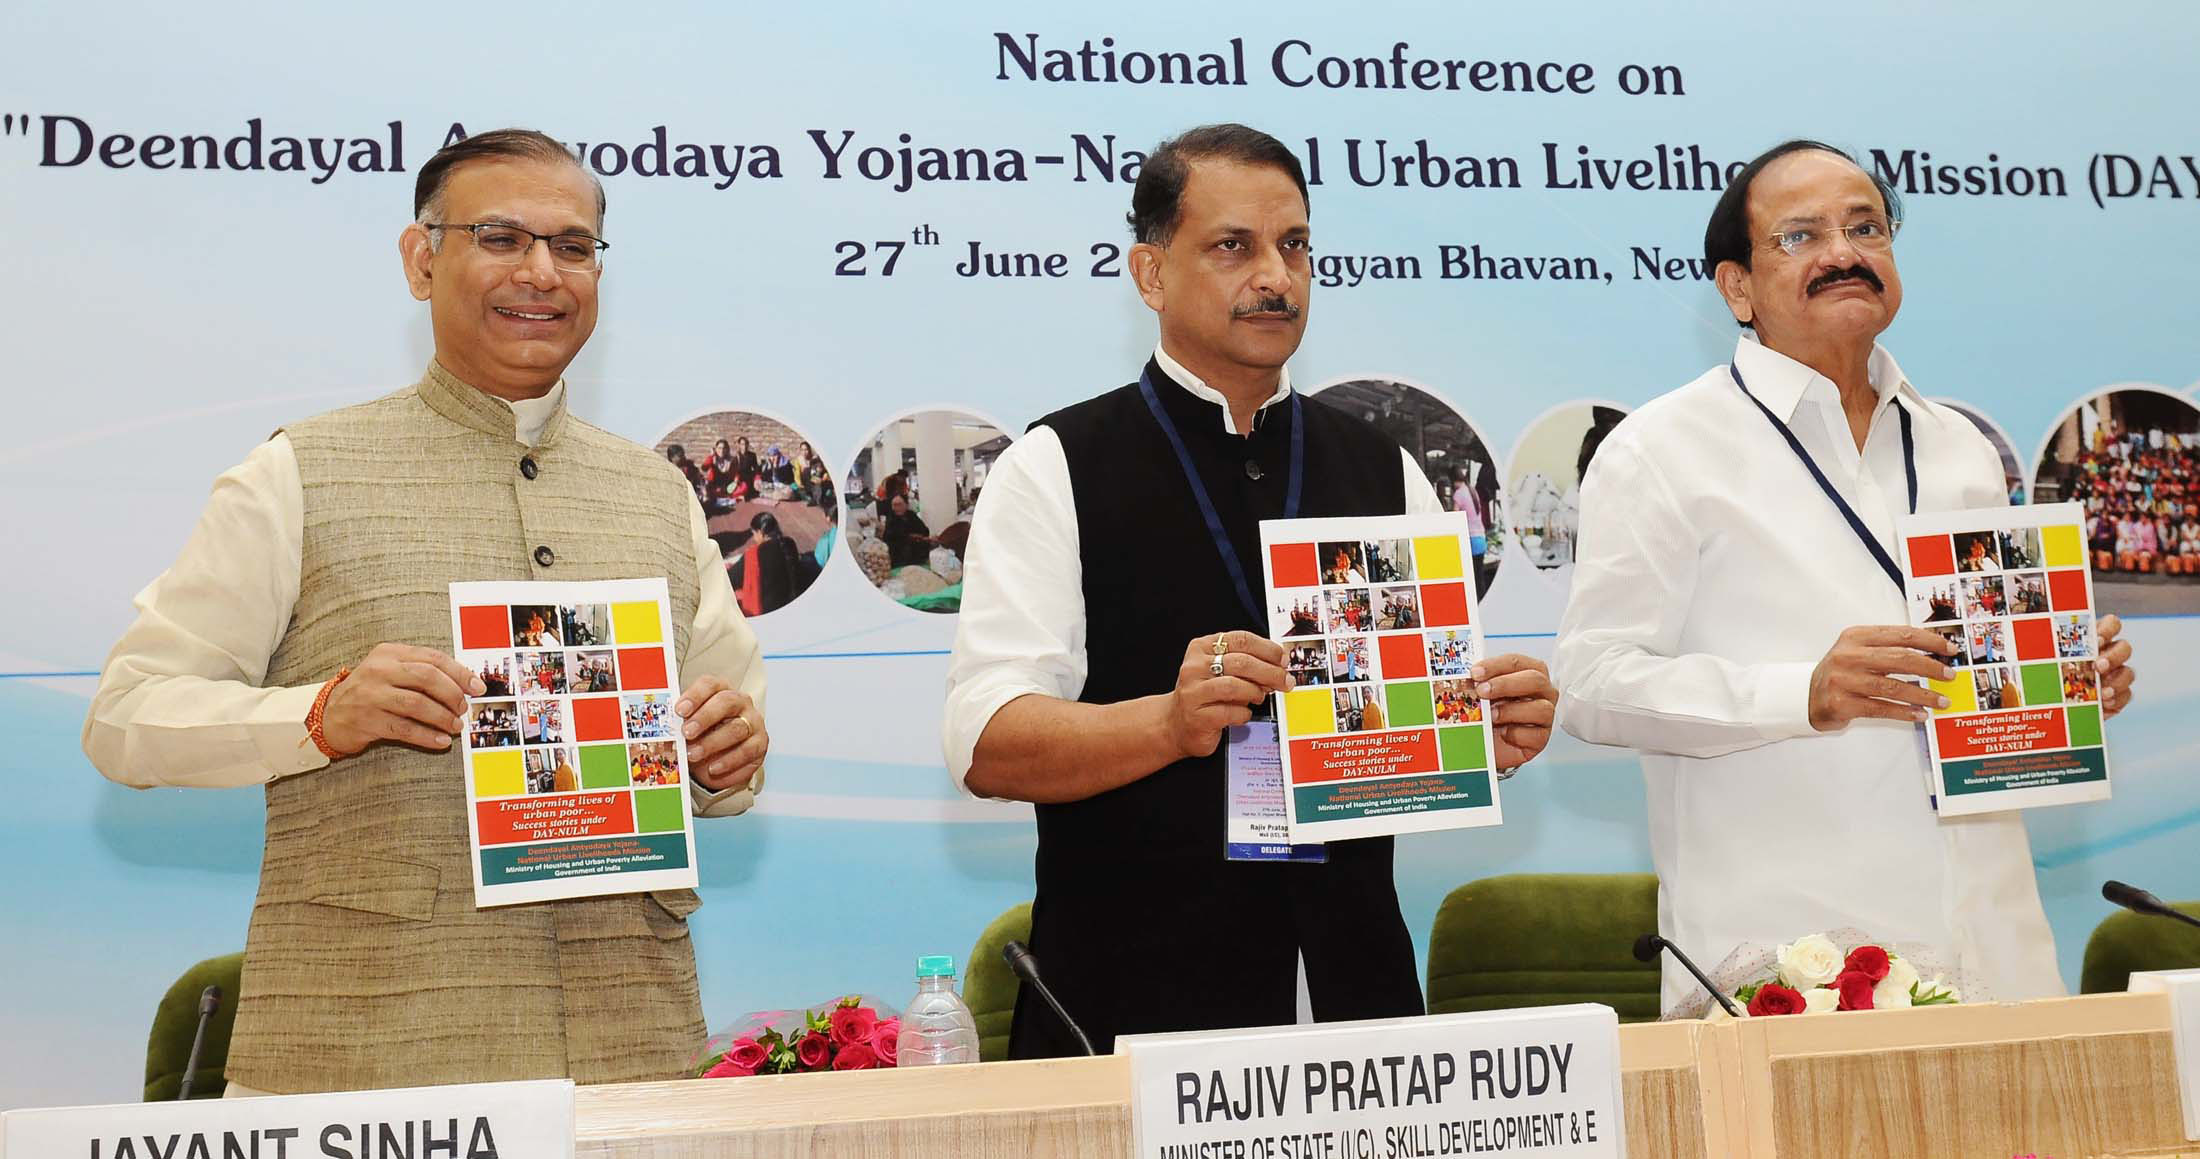 The Union Minister for Urban Development, Housing and Urban Poverty Alleviation and Parliamentary Affairs, Shri M. Venkaiah Naidu releasing the publication at the National Conference on Urban Poverty Alleviation, in New Delhi on June 27, 2016. The Minister of State for Skill Development & Entrepreneurship (Independent Charge) and Parliamentary Affairs, Shri Rajiv Pratap Rudy and the Minister of State for Finance, Shri Jayant Sinha are also seen.